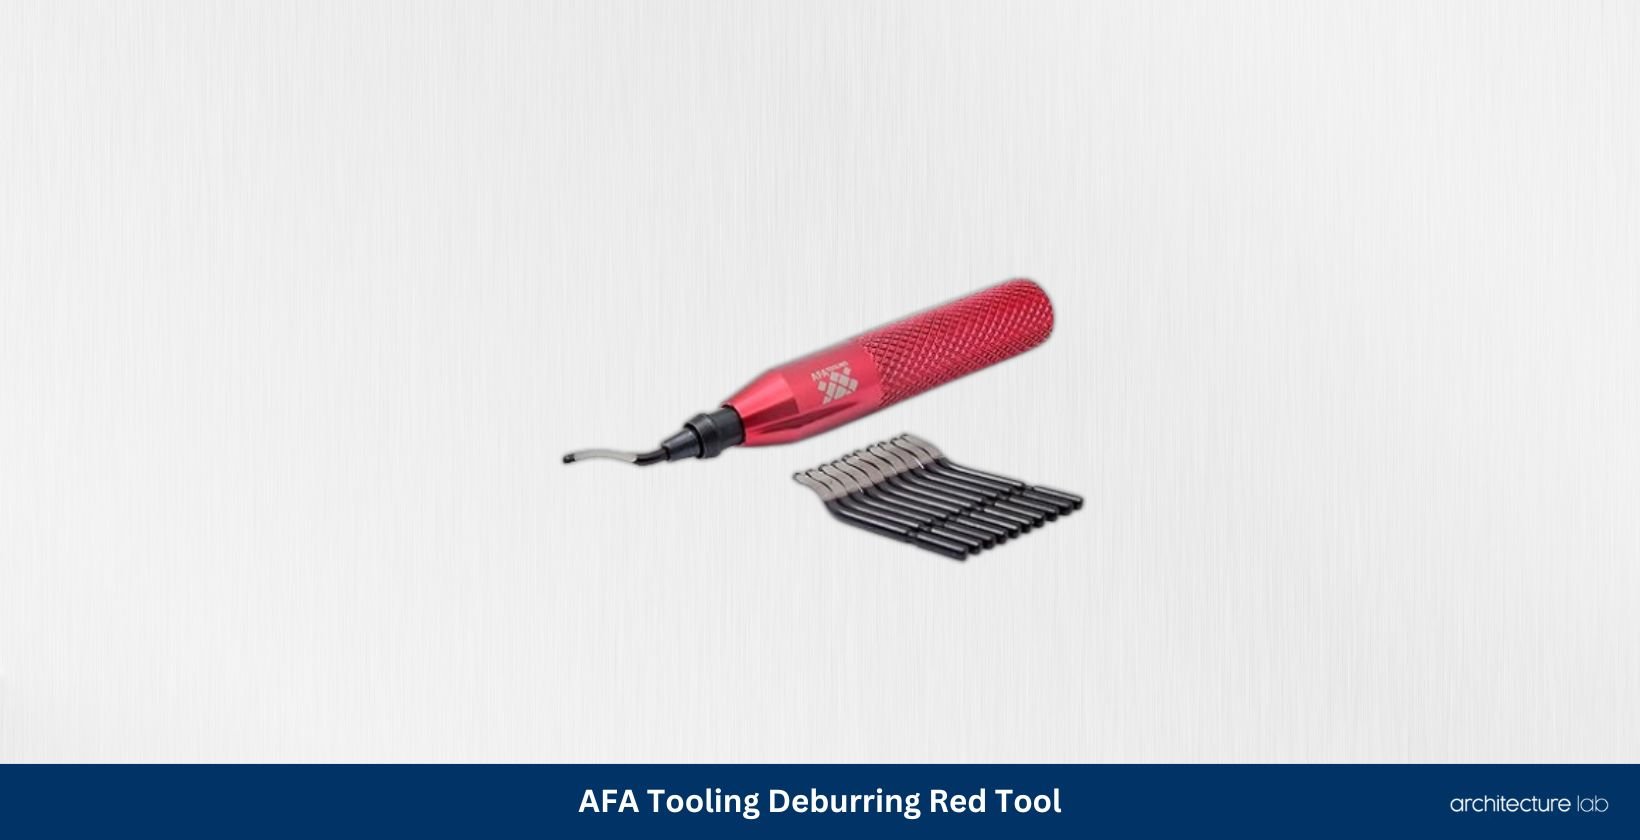 Afa tooling deburring red tool with 11 bs1010 high speed steel blades